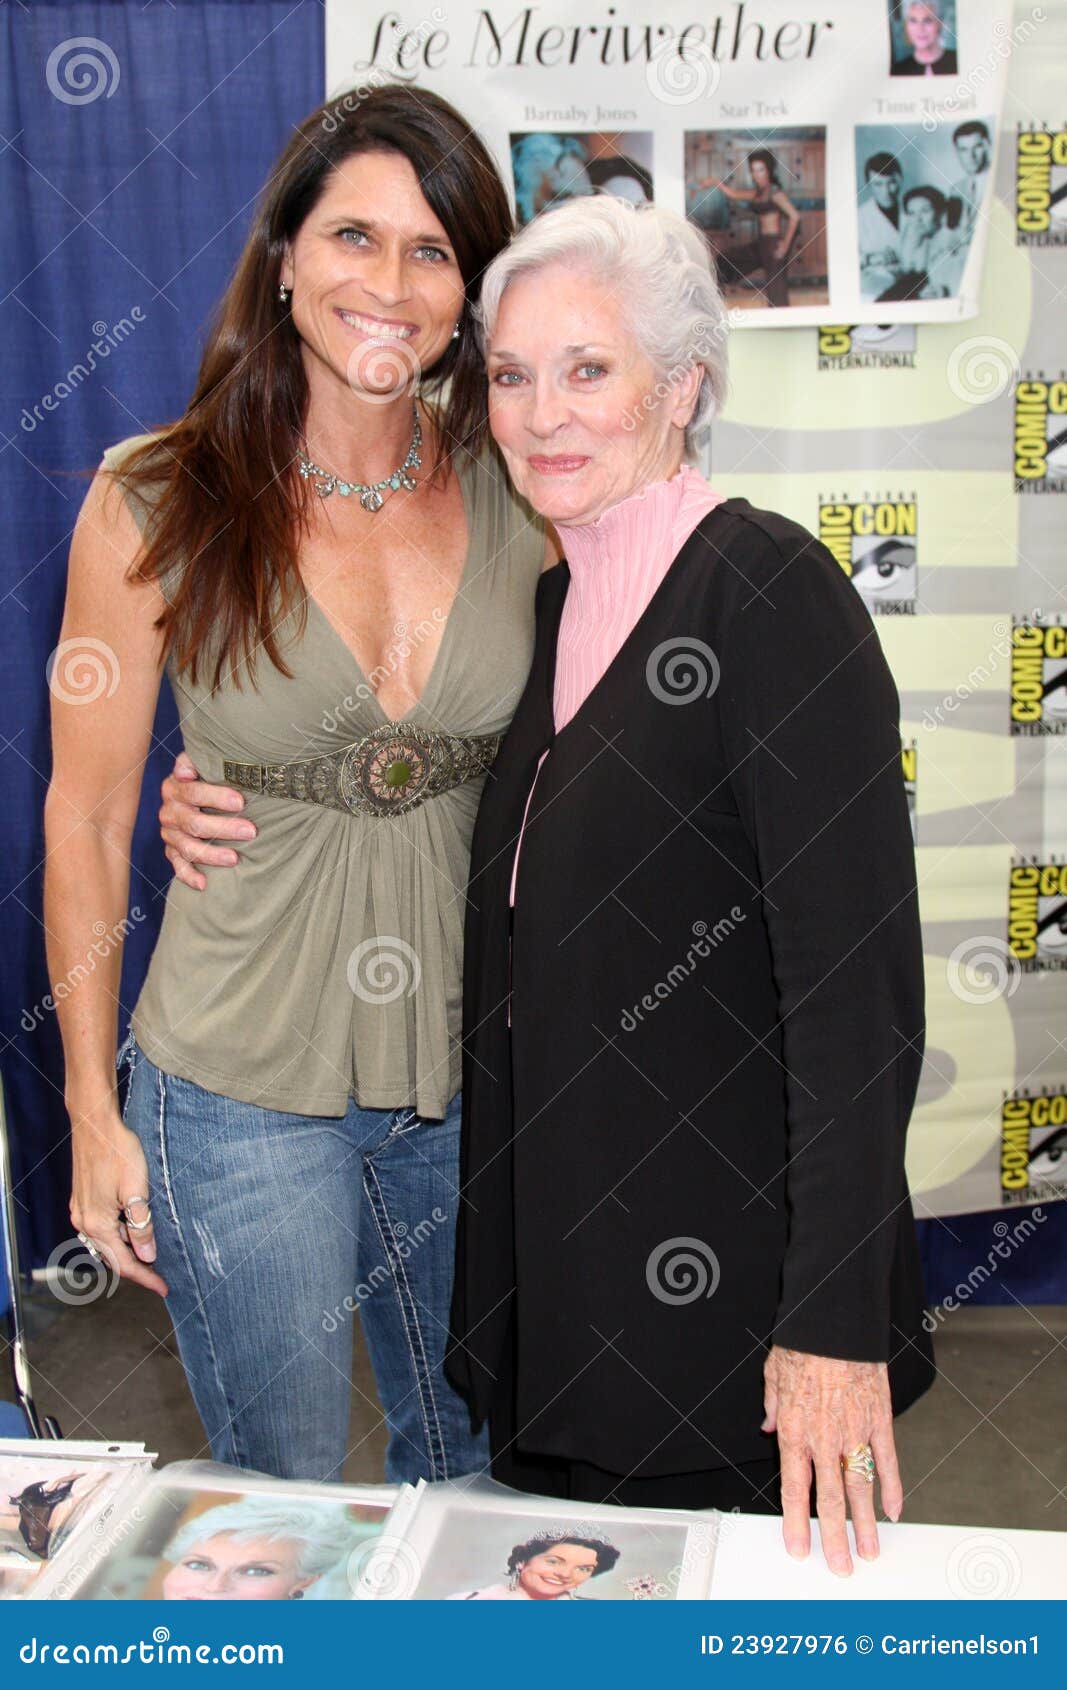 diane pooler recommends lee meriwether images pic